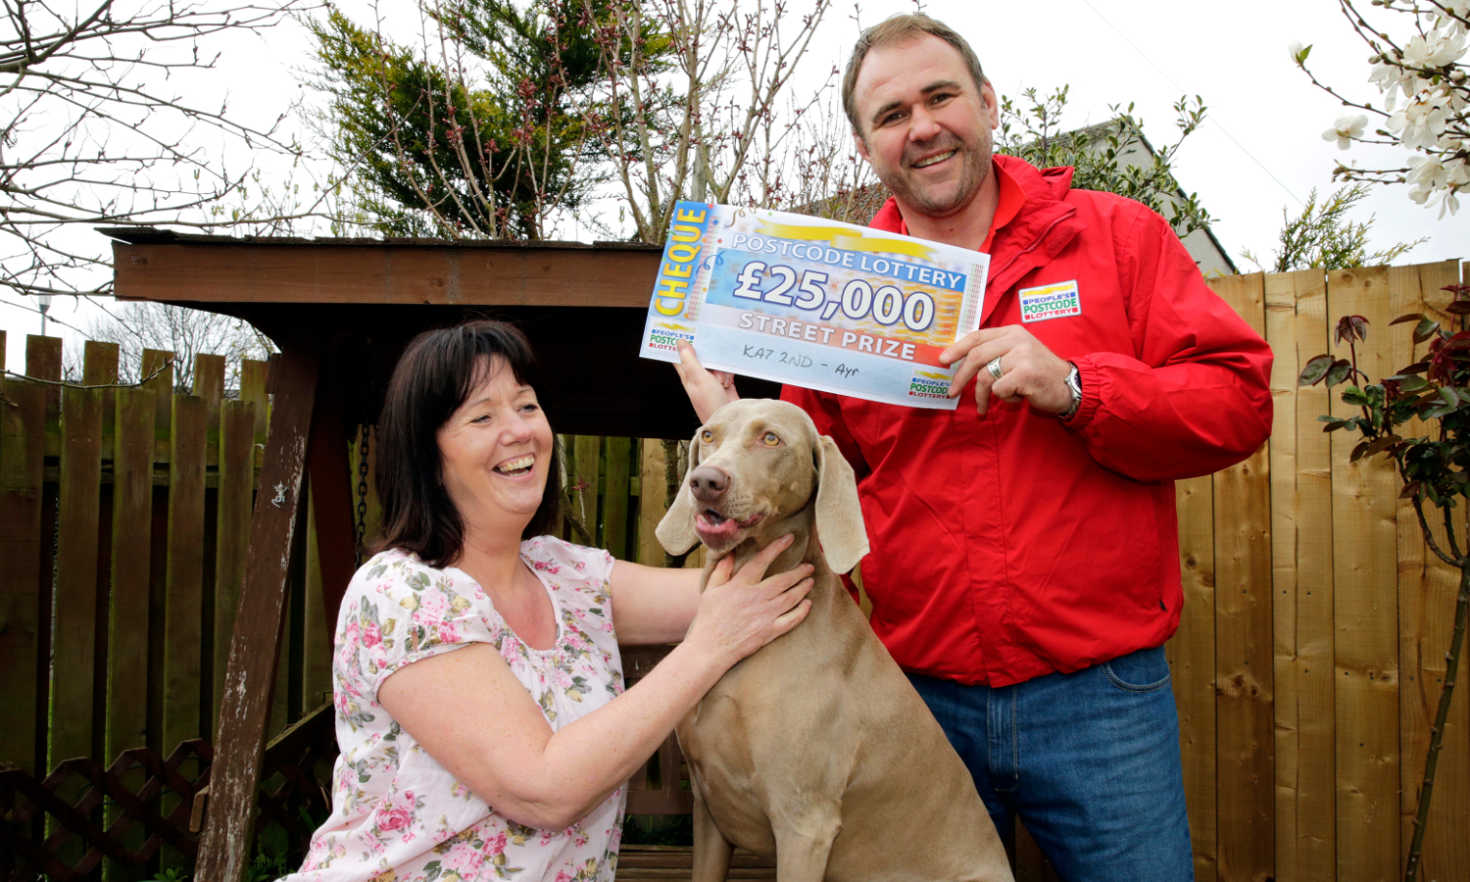 Our lucky Ayr player, Janet Paul, who was ecstatic to win a whopping £25,000